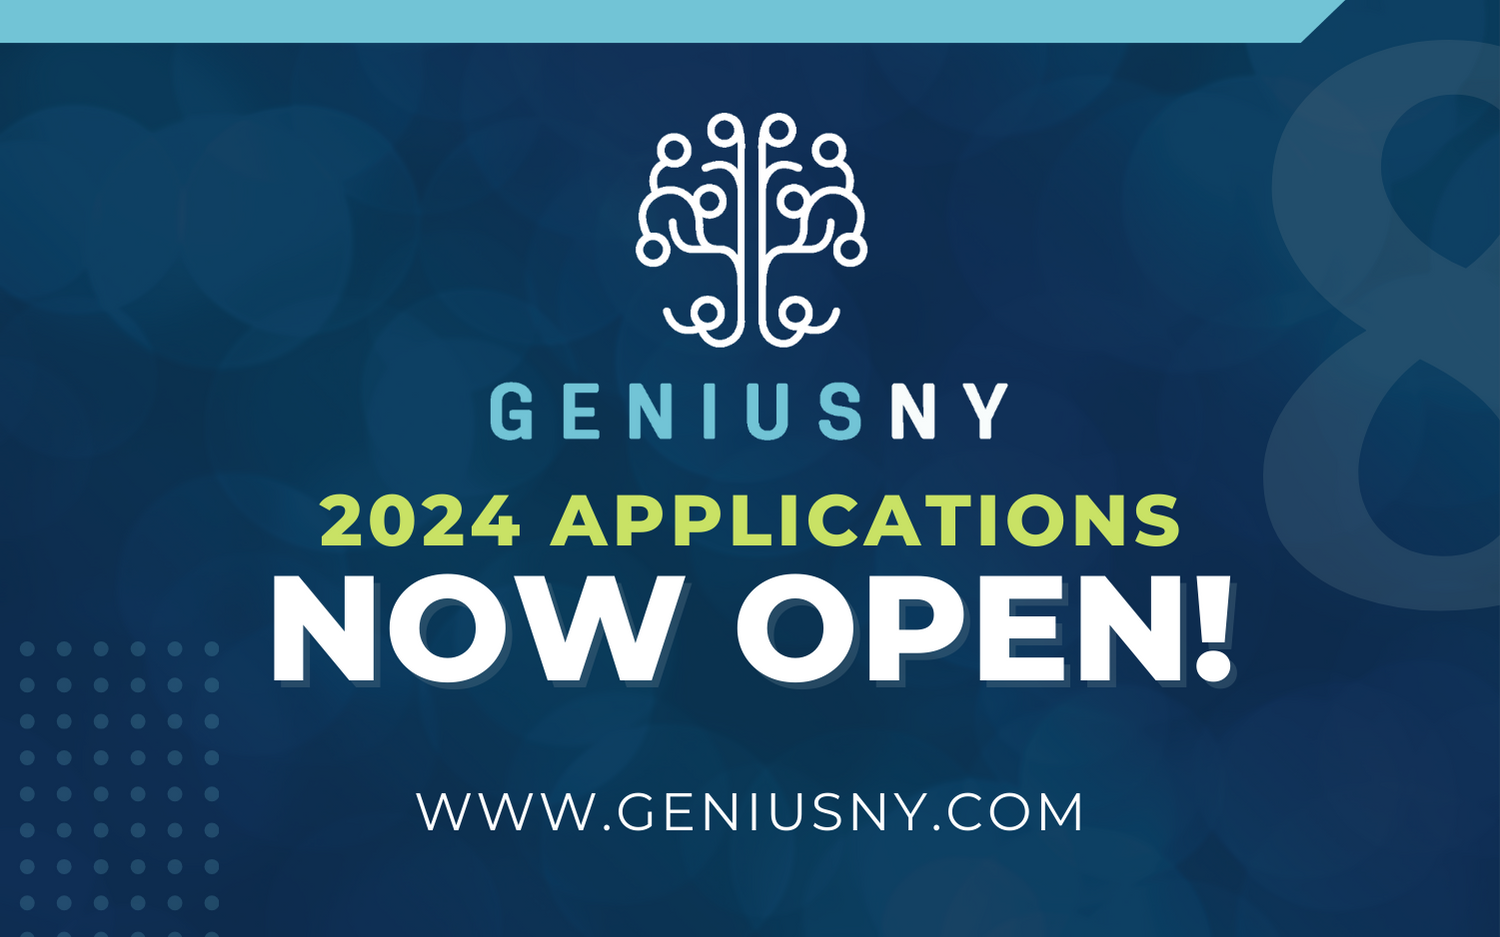 Empire State Development Announces Application Window Open for Round Eight of GENIUS NY Accelerator